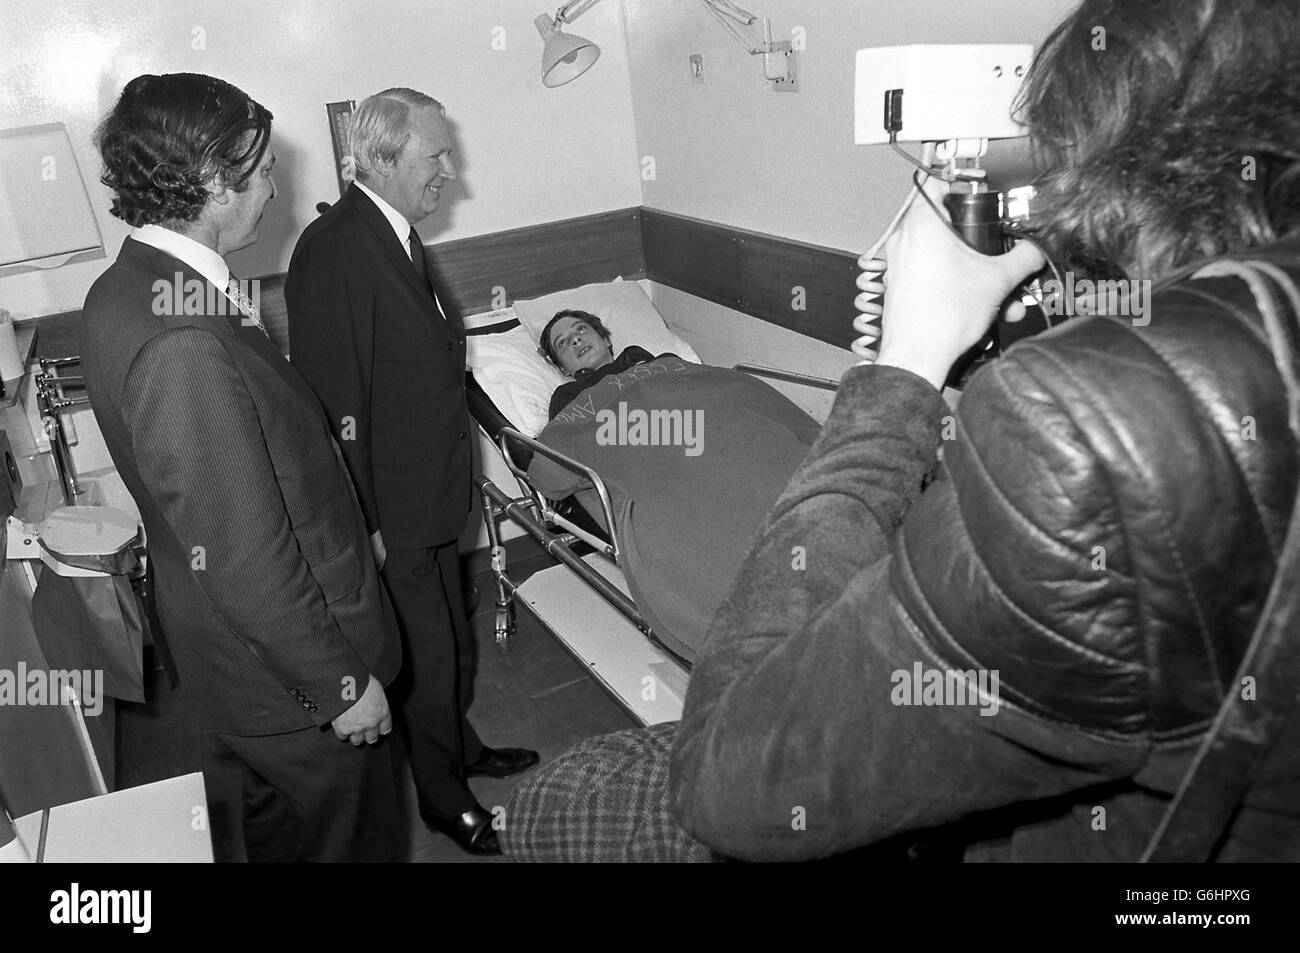 Prime Minister Edward Heath meets a victim of the London bomb explosions at St Thomas's Hospital. Stock Photo